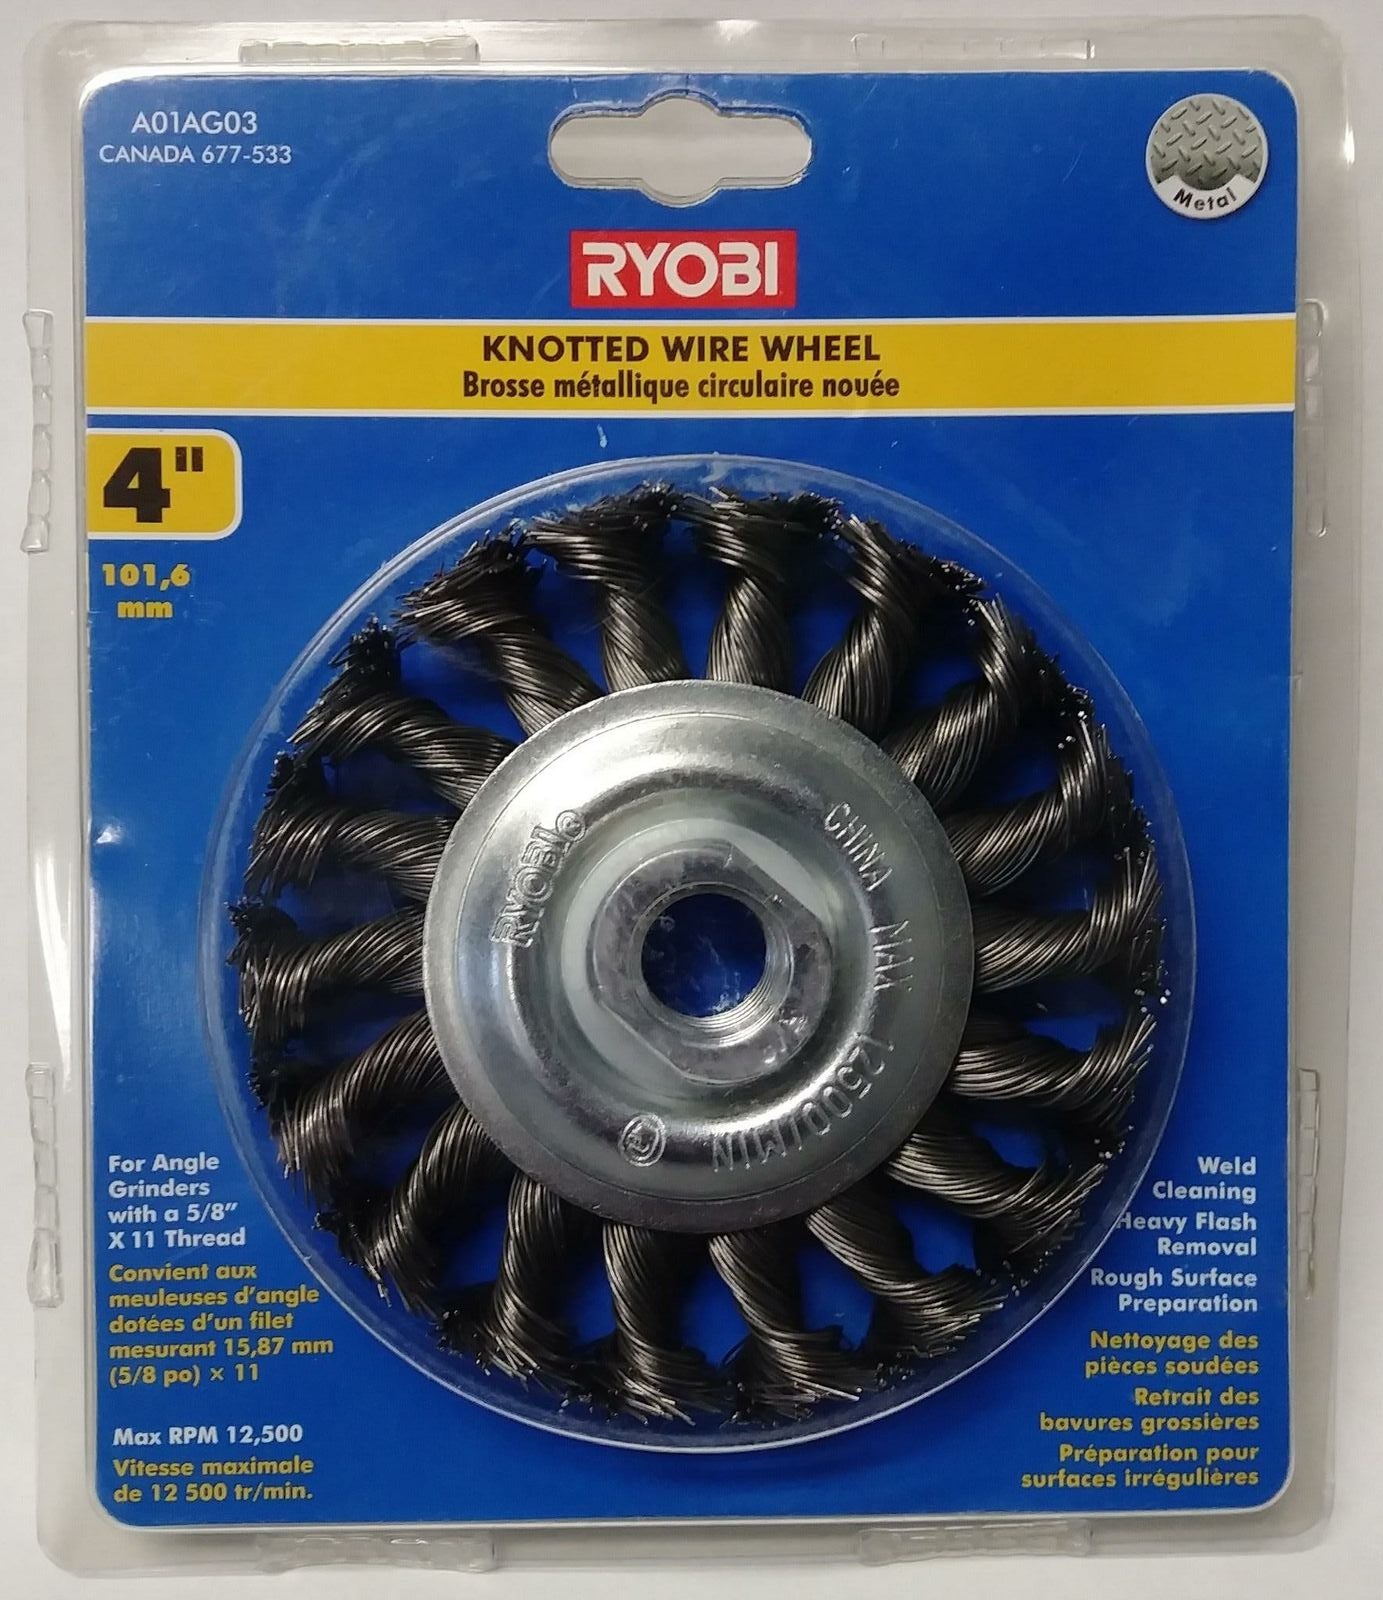 Ryobi A01AG03 4" Knotted Wire Wheel